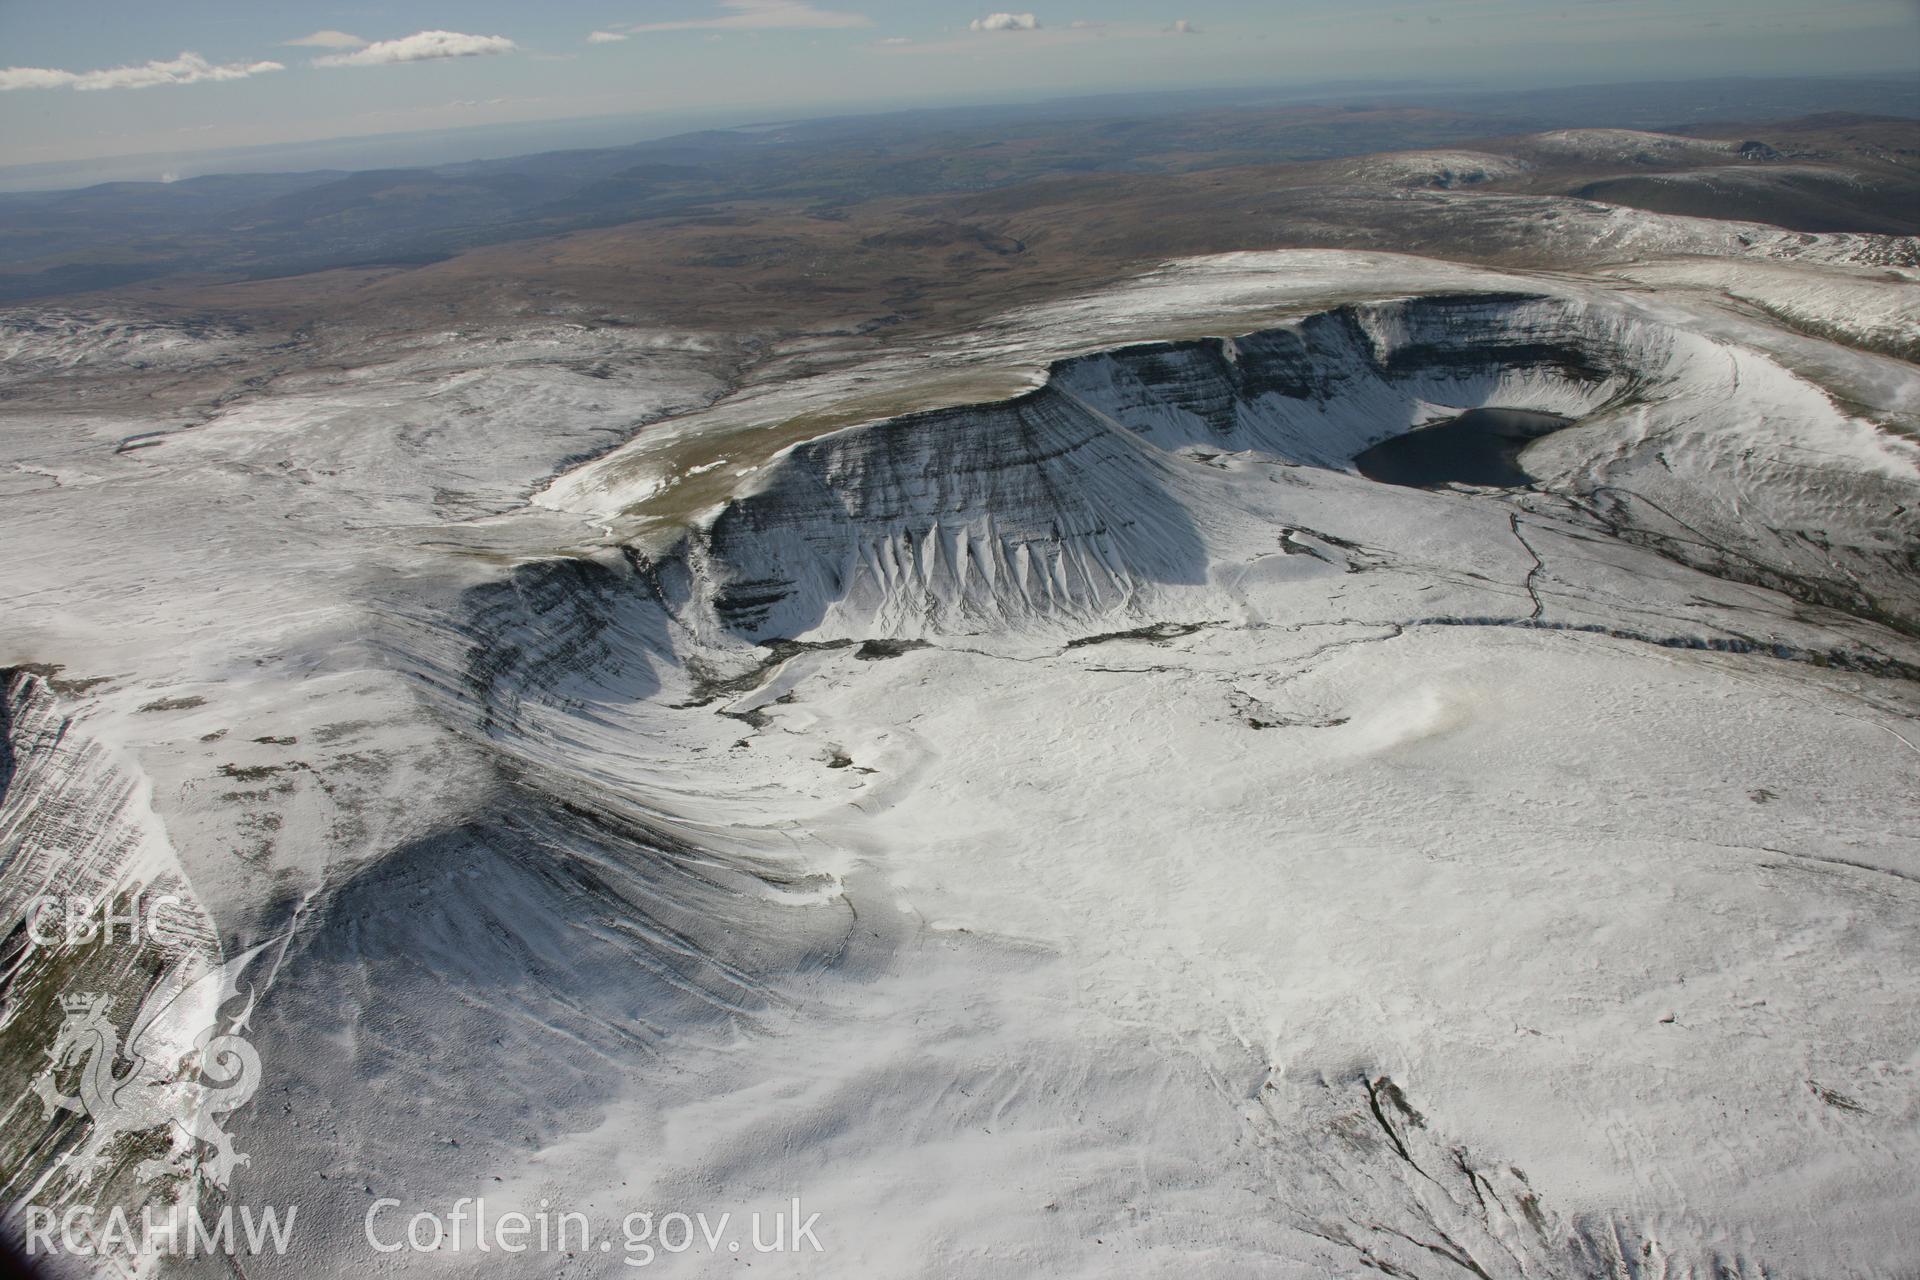 RCAHMW colour oblique aerial photograph of Llyn y Fan Fach in winter landscape viewed from the east. Taken on 21 March 2007 by Toby Driver